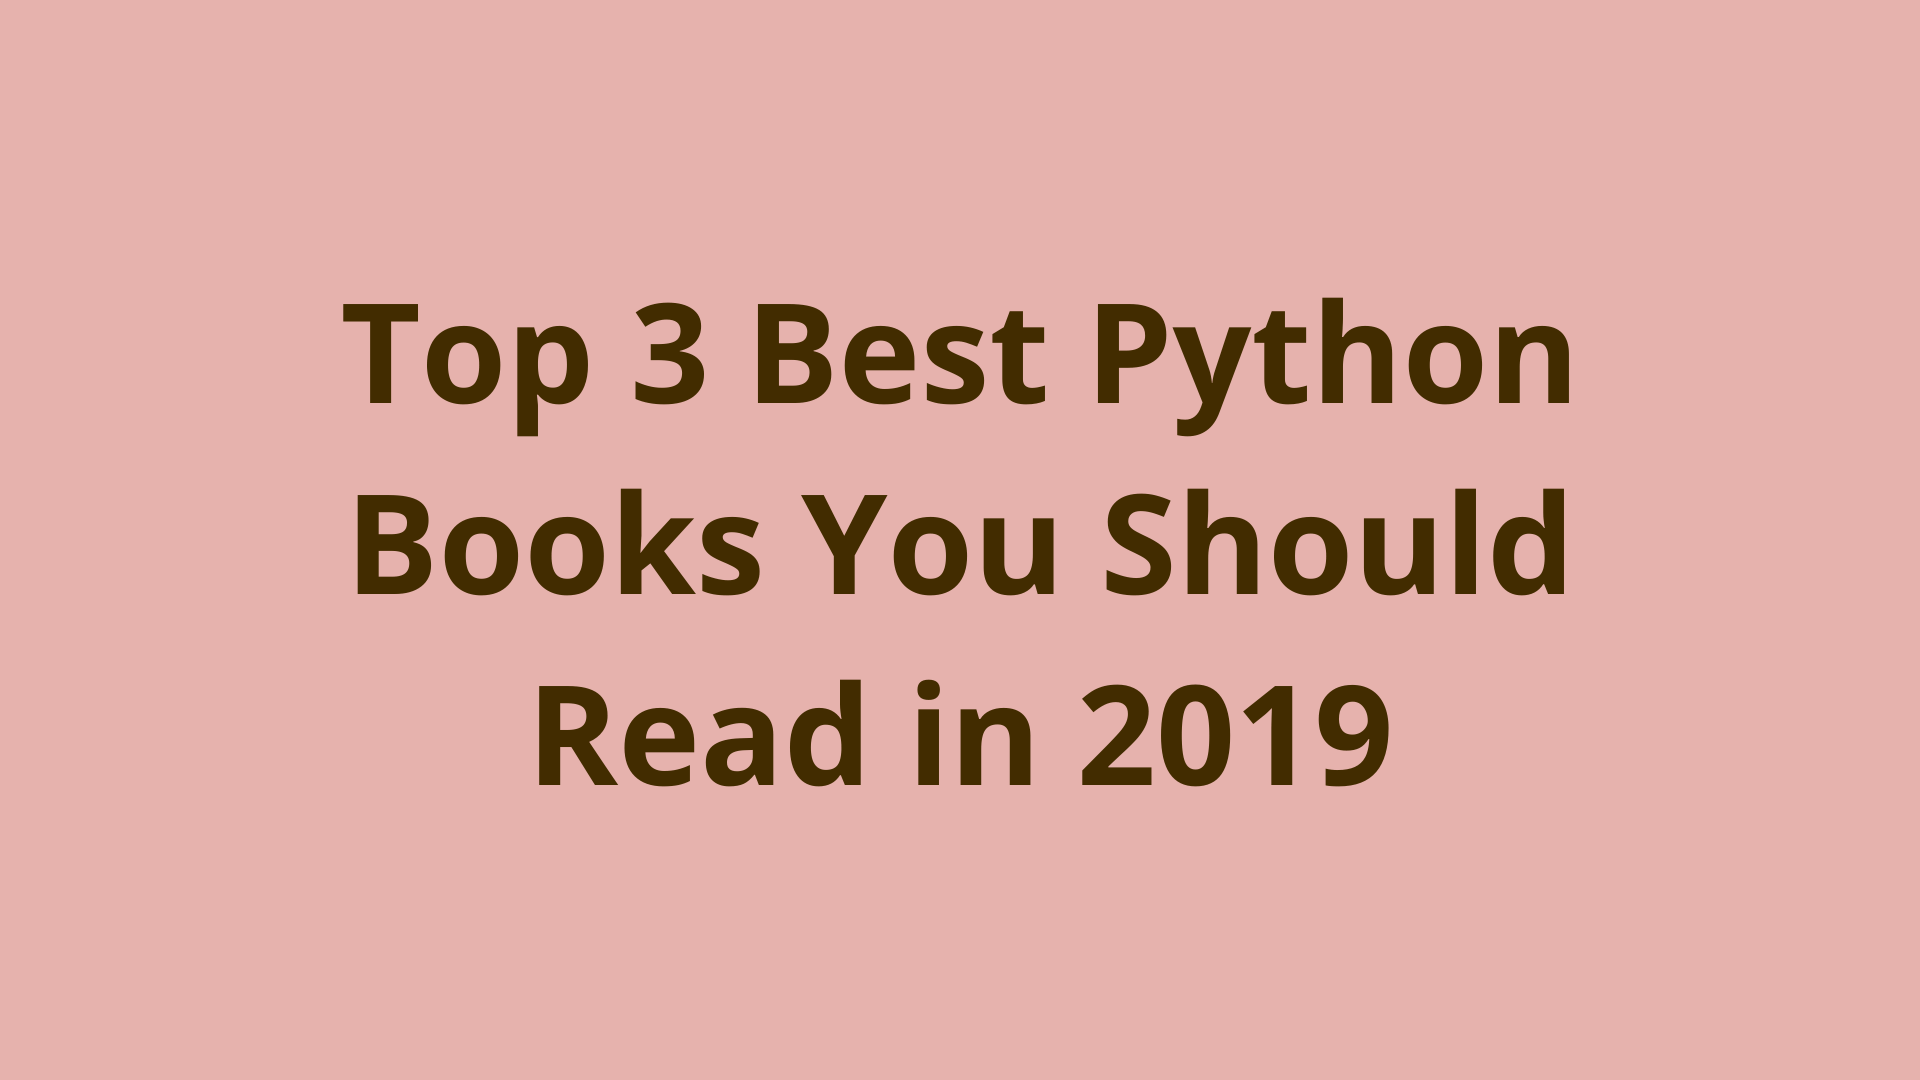 Image of Top 3 best Python books you should read in 2019